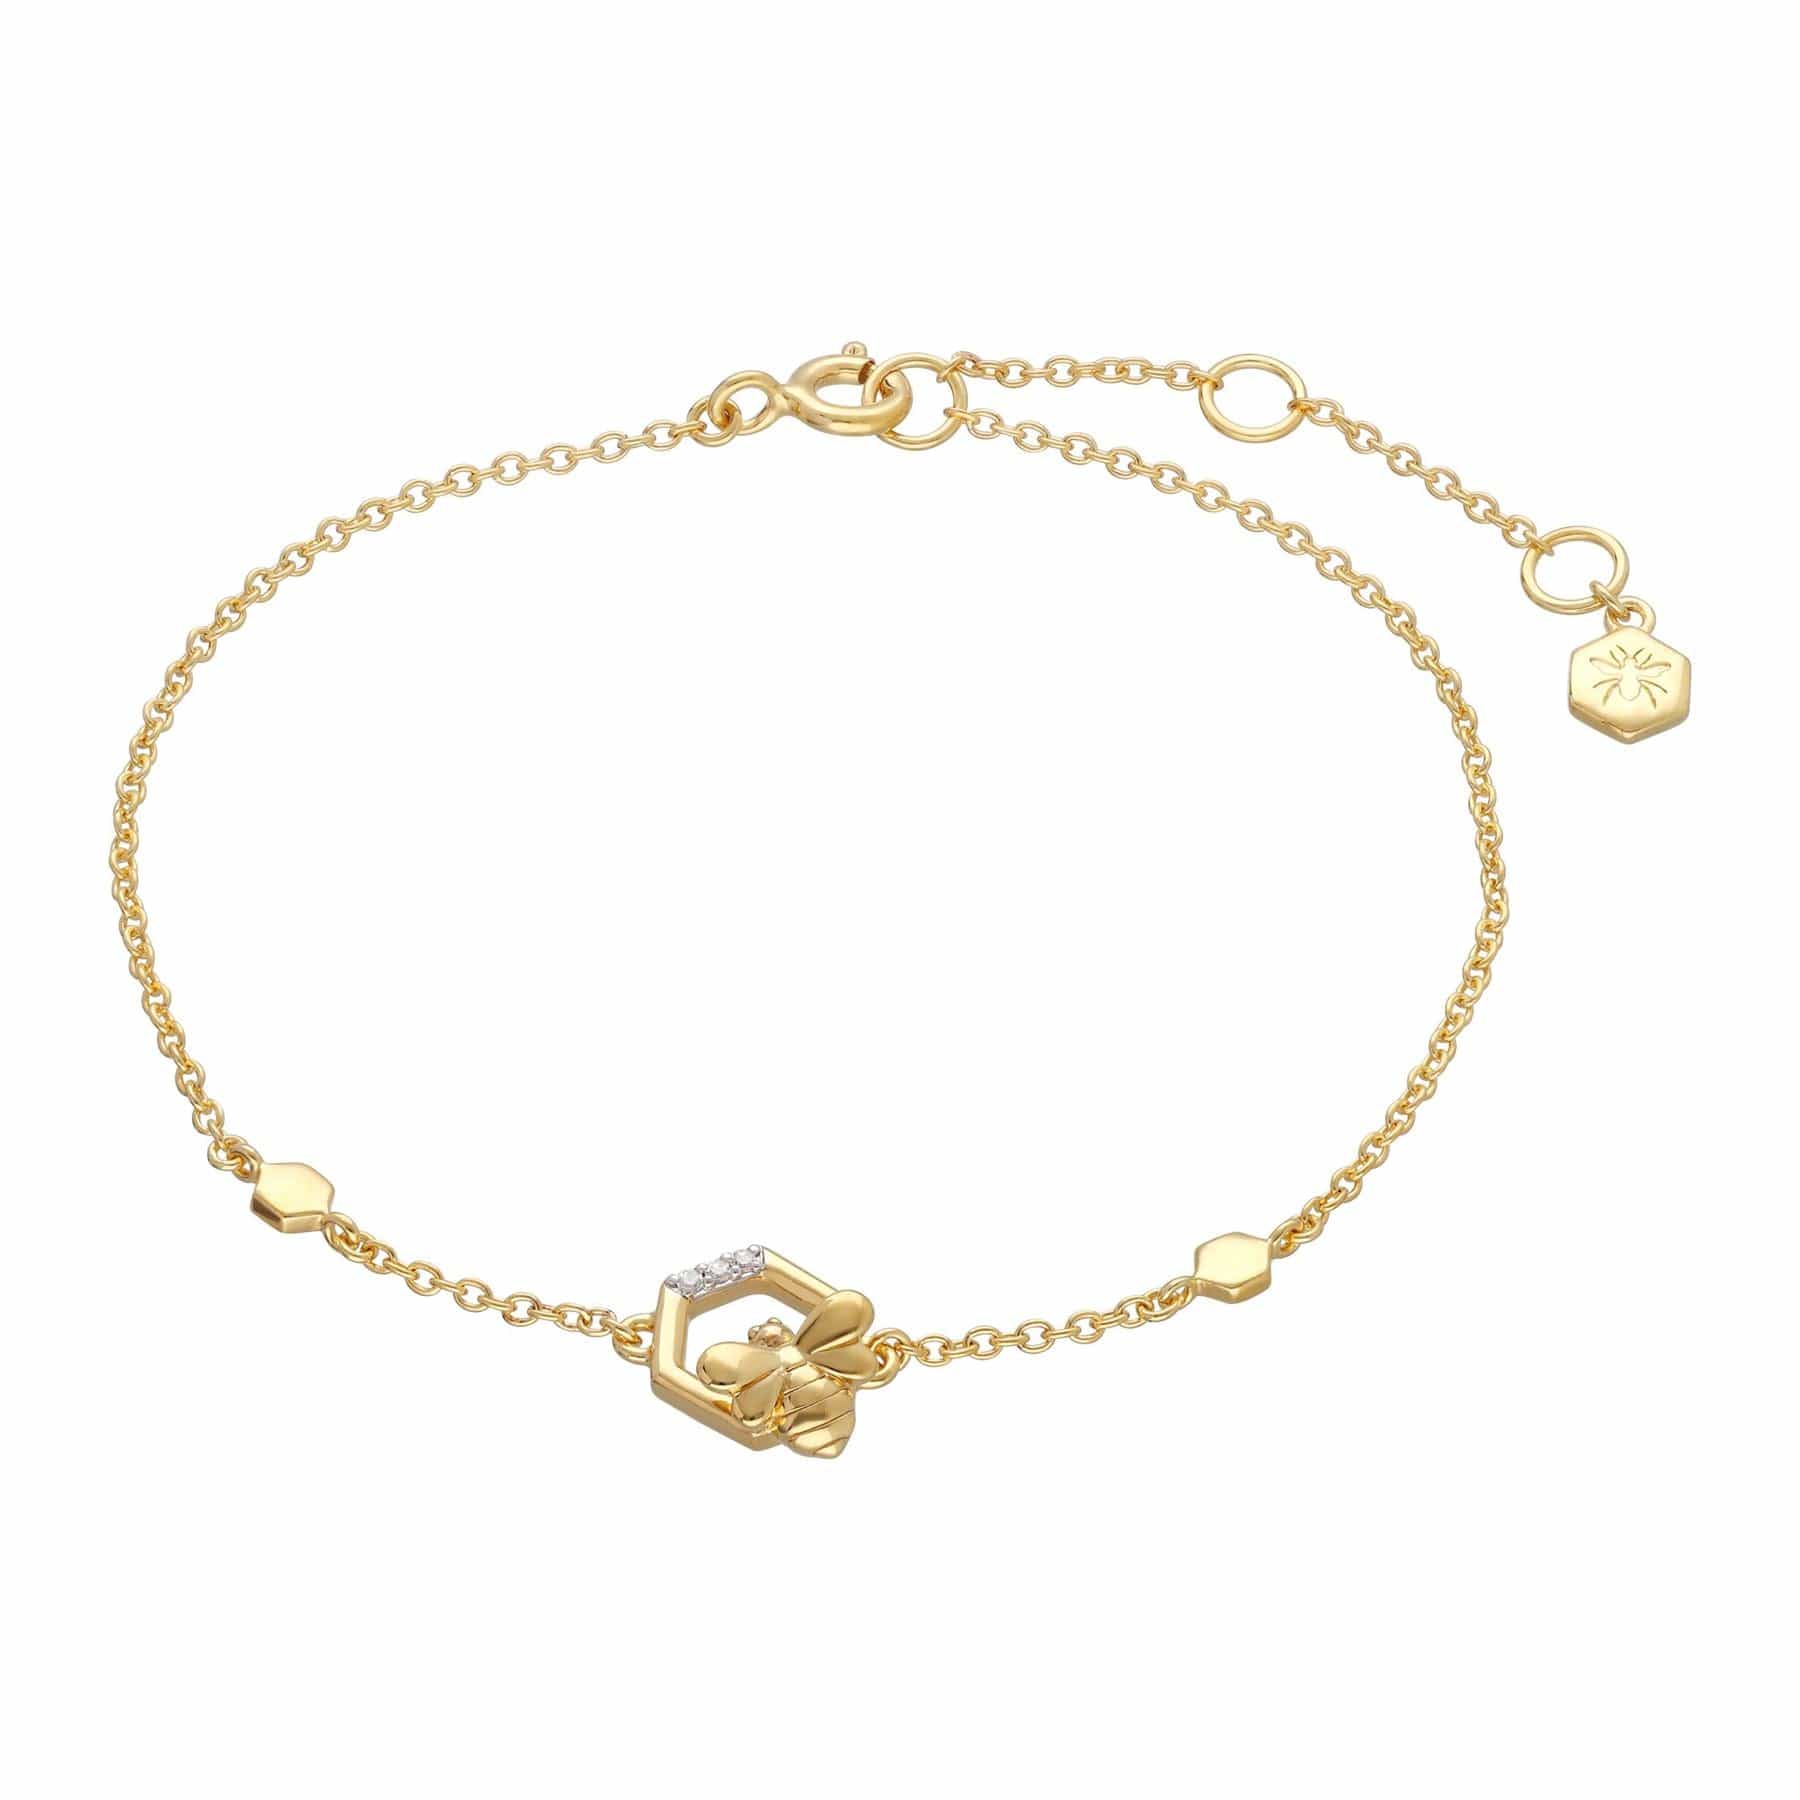 Honeycomb Inspired Bee Bracelet in 9ct Yellow Gold